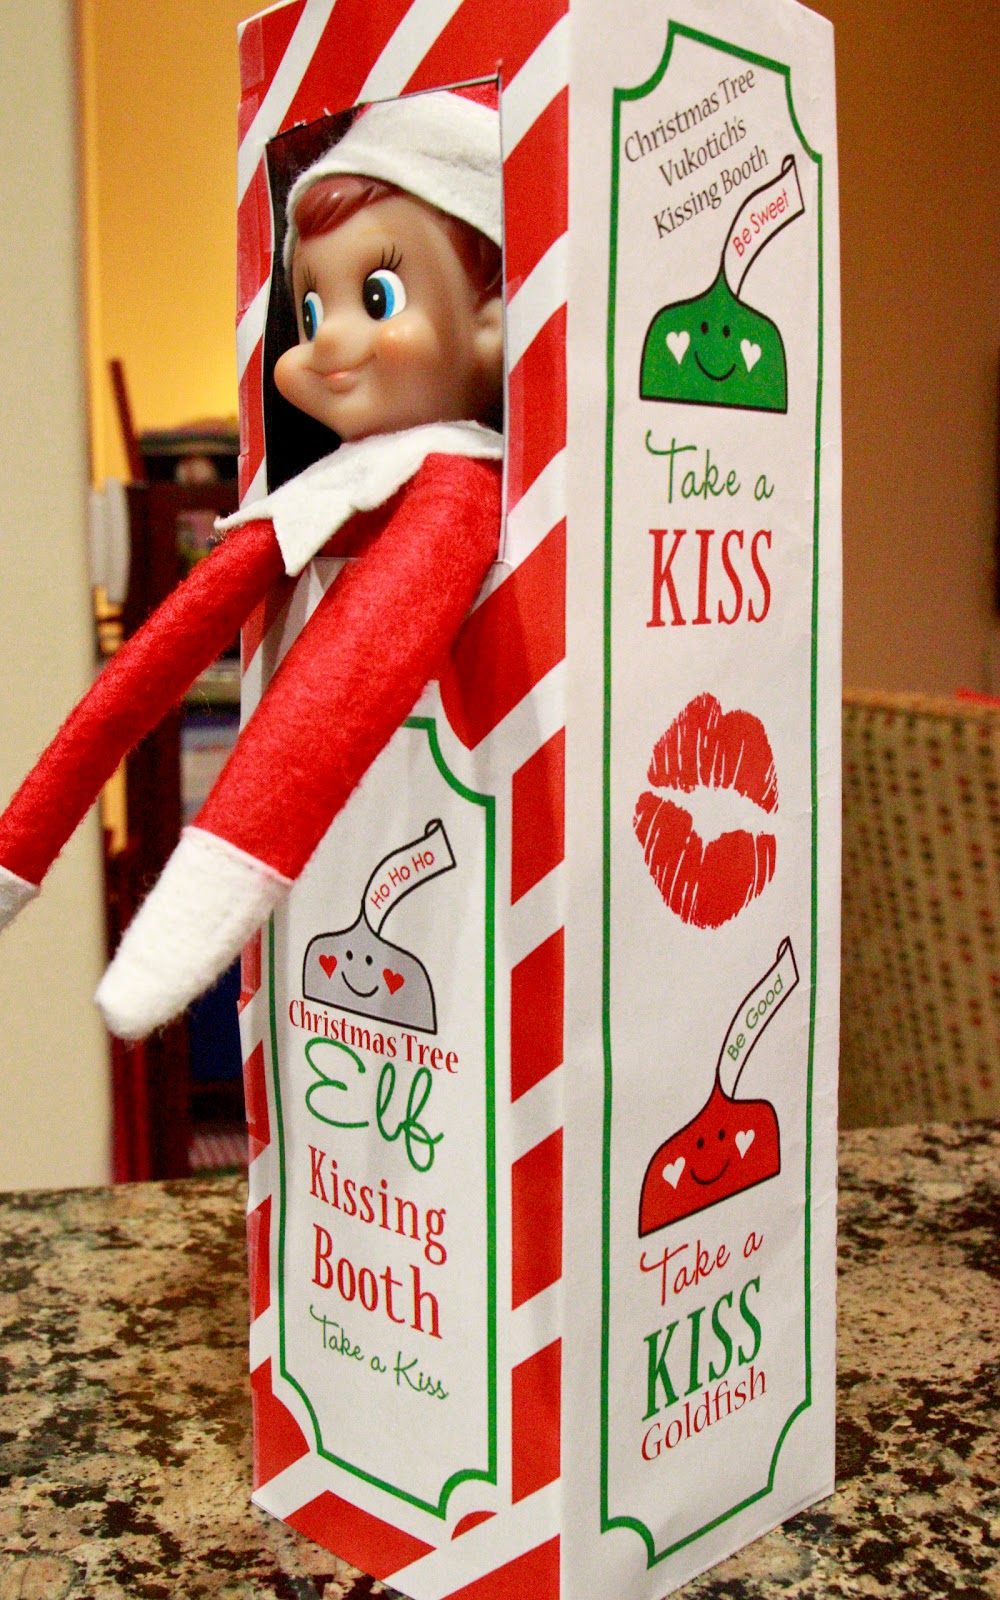 The Vukotich Elf on the Shelf 2013 Kissing Booth